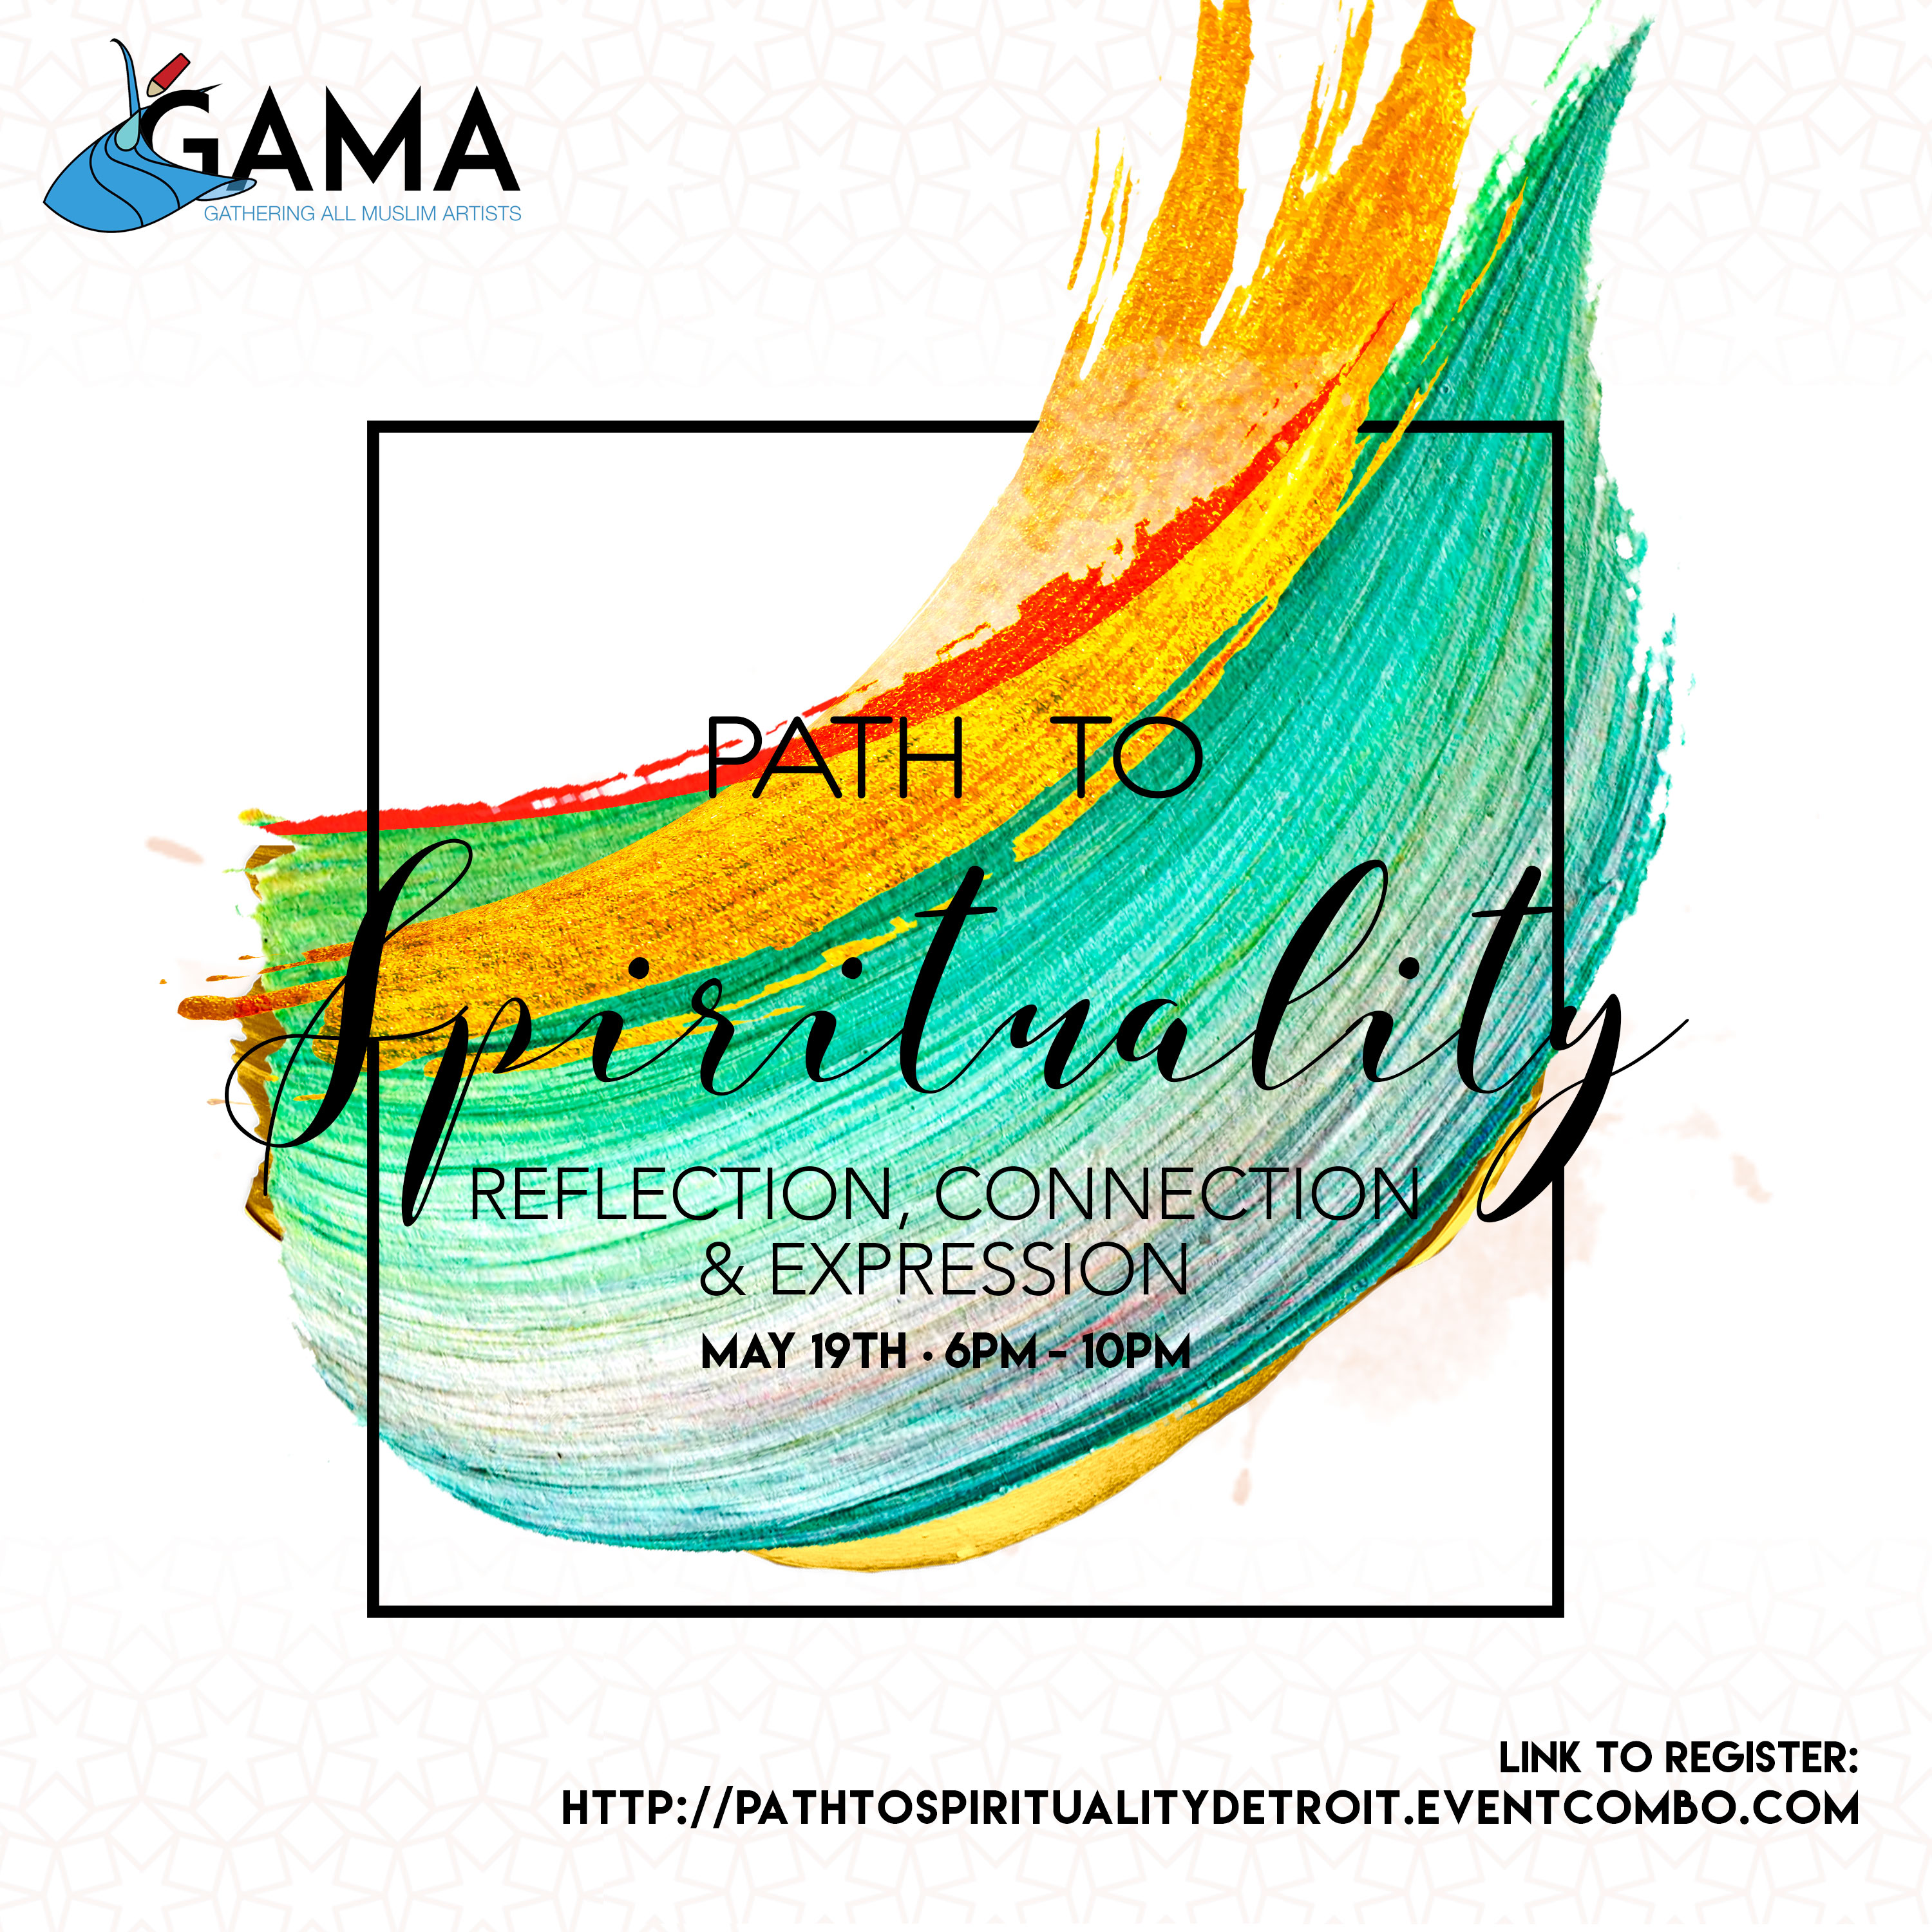 Path to Spirituality: 
Reflection, Connection & Expression